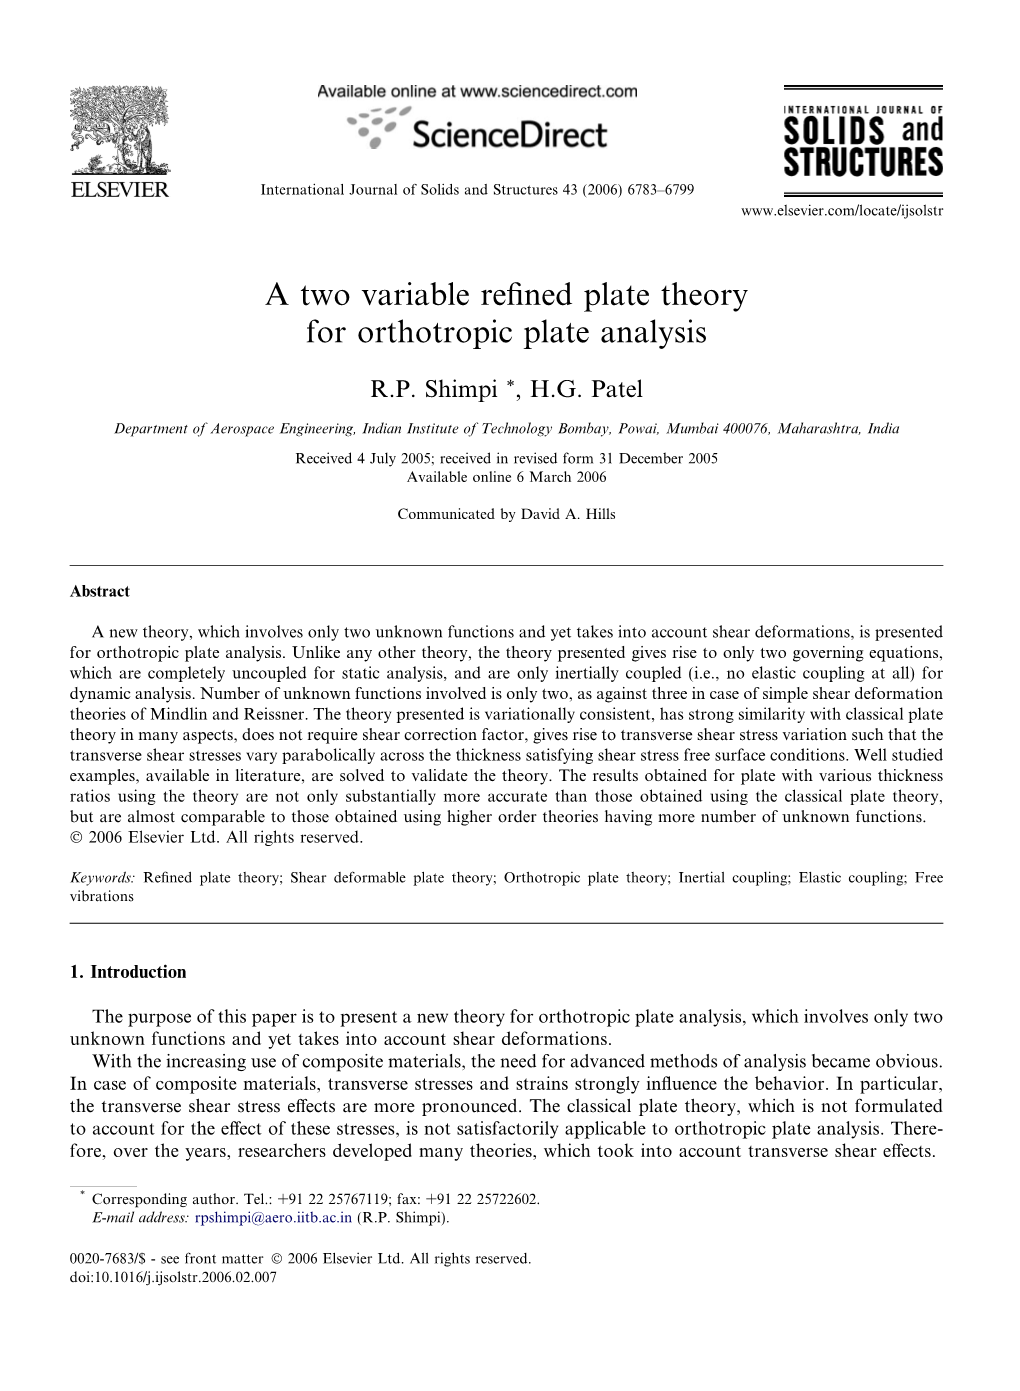 A Two Variable Refined Plate Theory for Orthotropic Plate Analysis